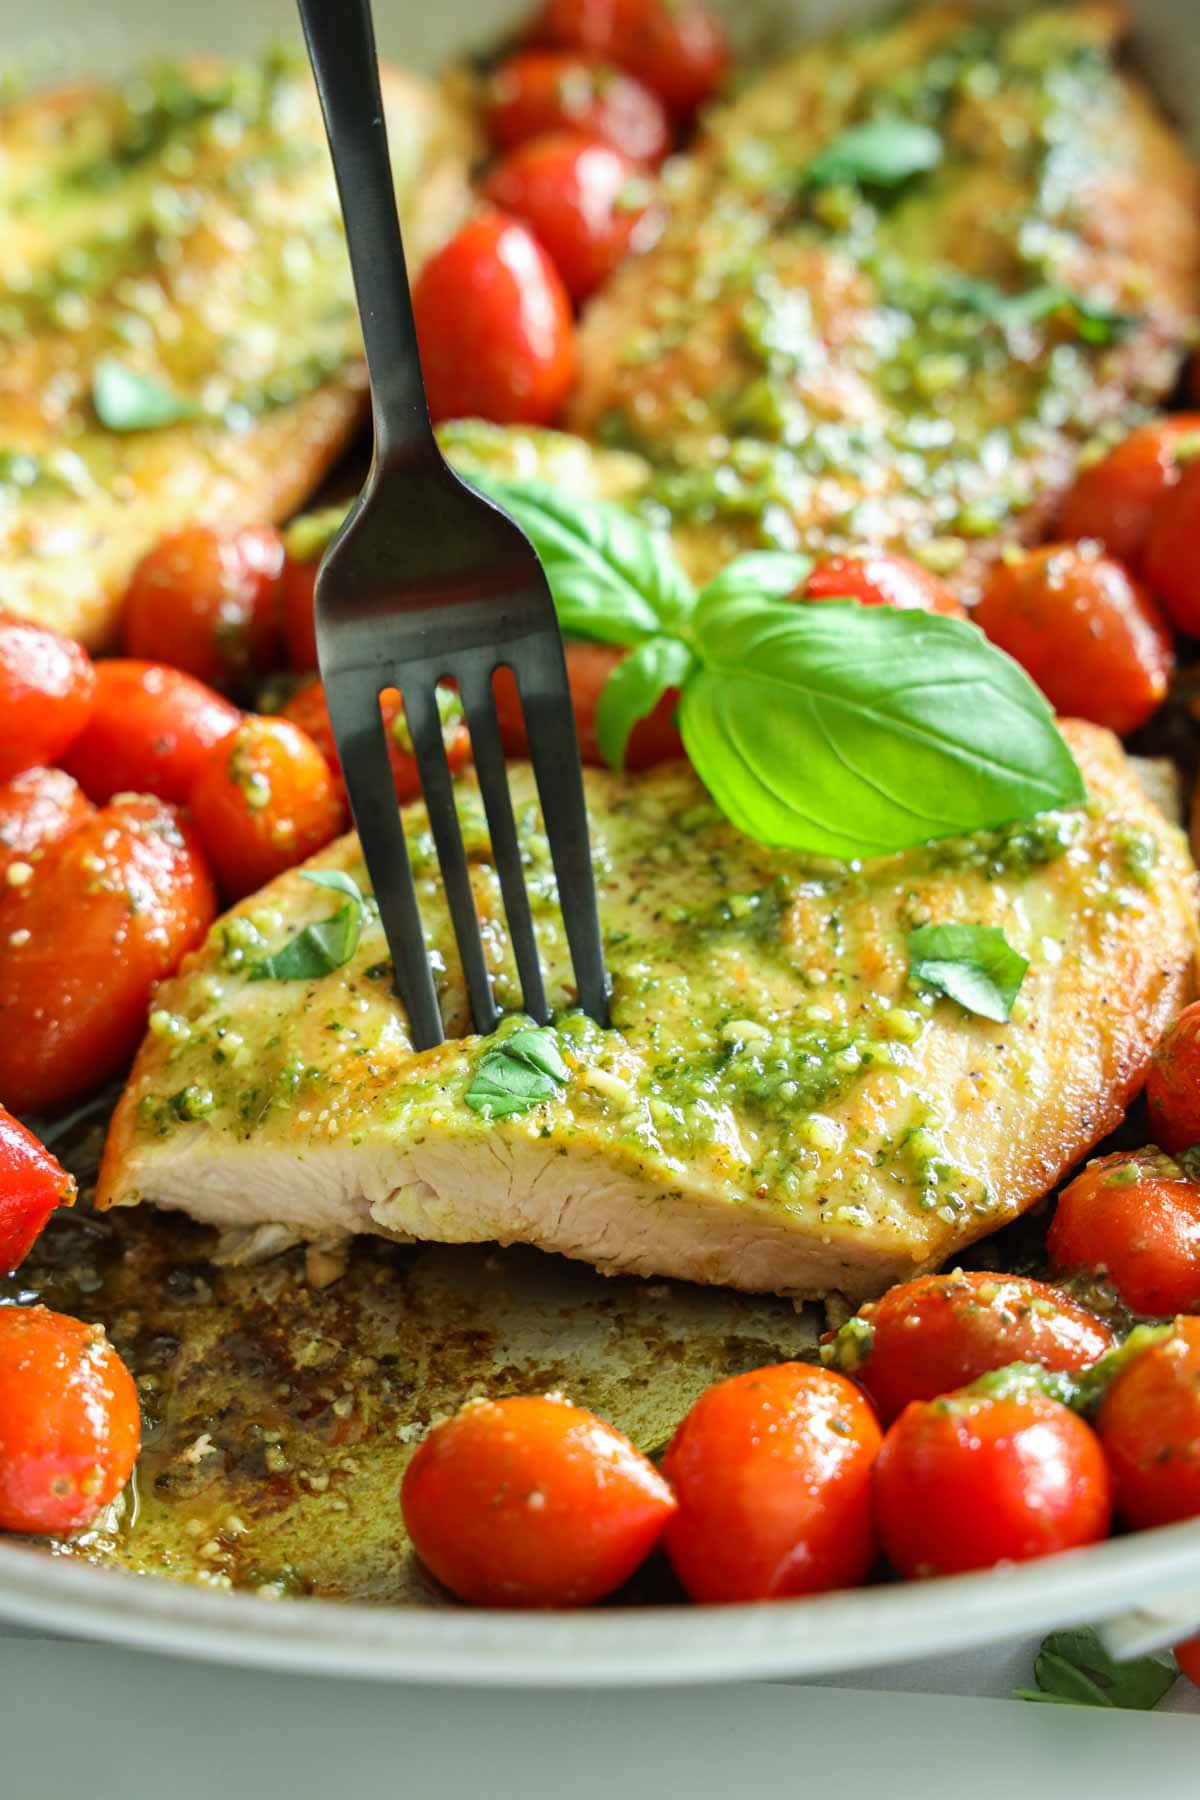 Pesto chicken breast on a fork, grape tomatoes around and fresh basil as garnish.